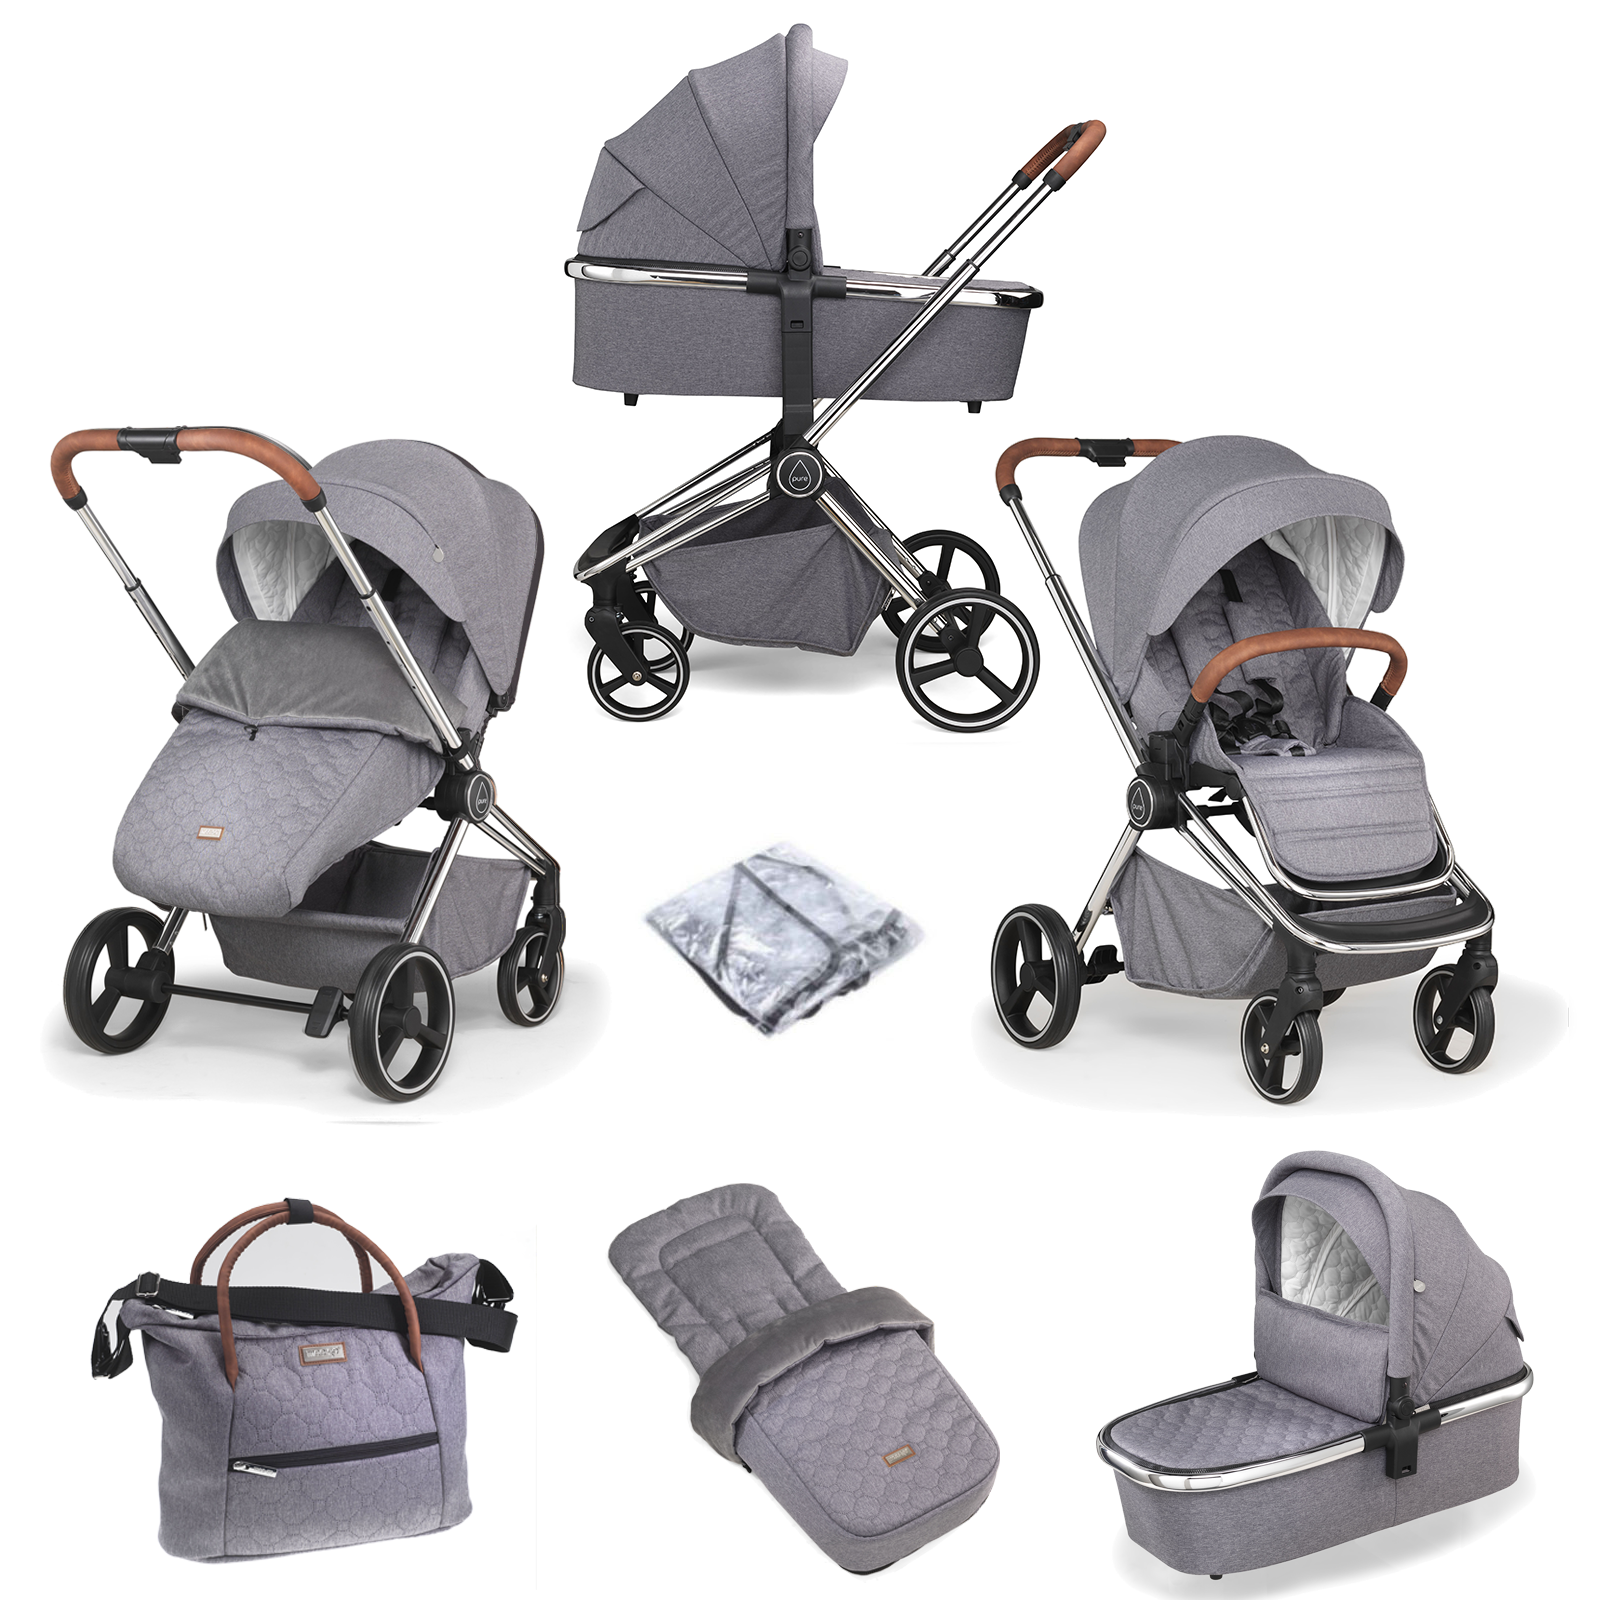 Mee-go Pure Pushchair with Carrycot & Accessories - Pearl Grey